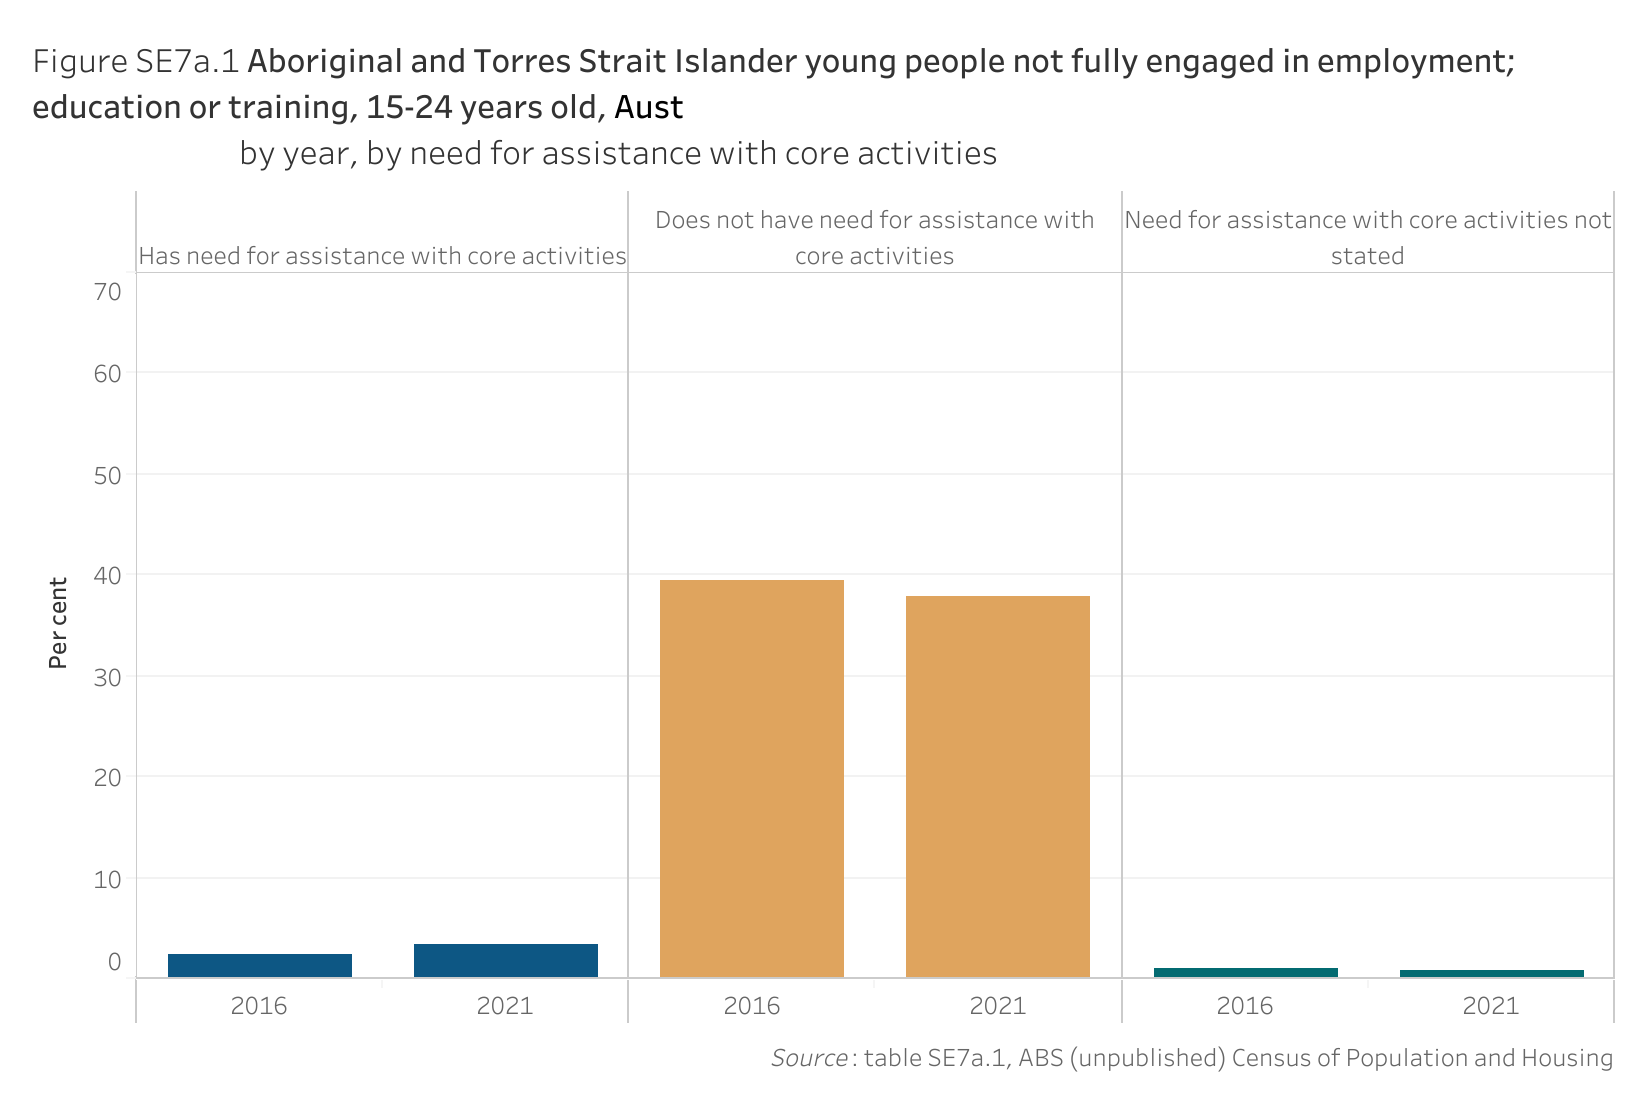 Figure SE7a.1 shows Aboriginal and Torres Strait Islander young people not fully engaged in employment; education or training, 15-24 years old, Australia, by year, by need for assistance with core activities. More details can be found within the text near this image.